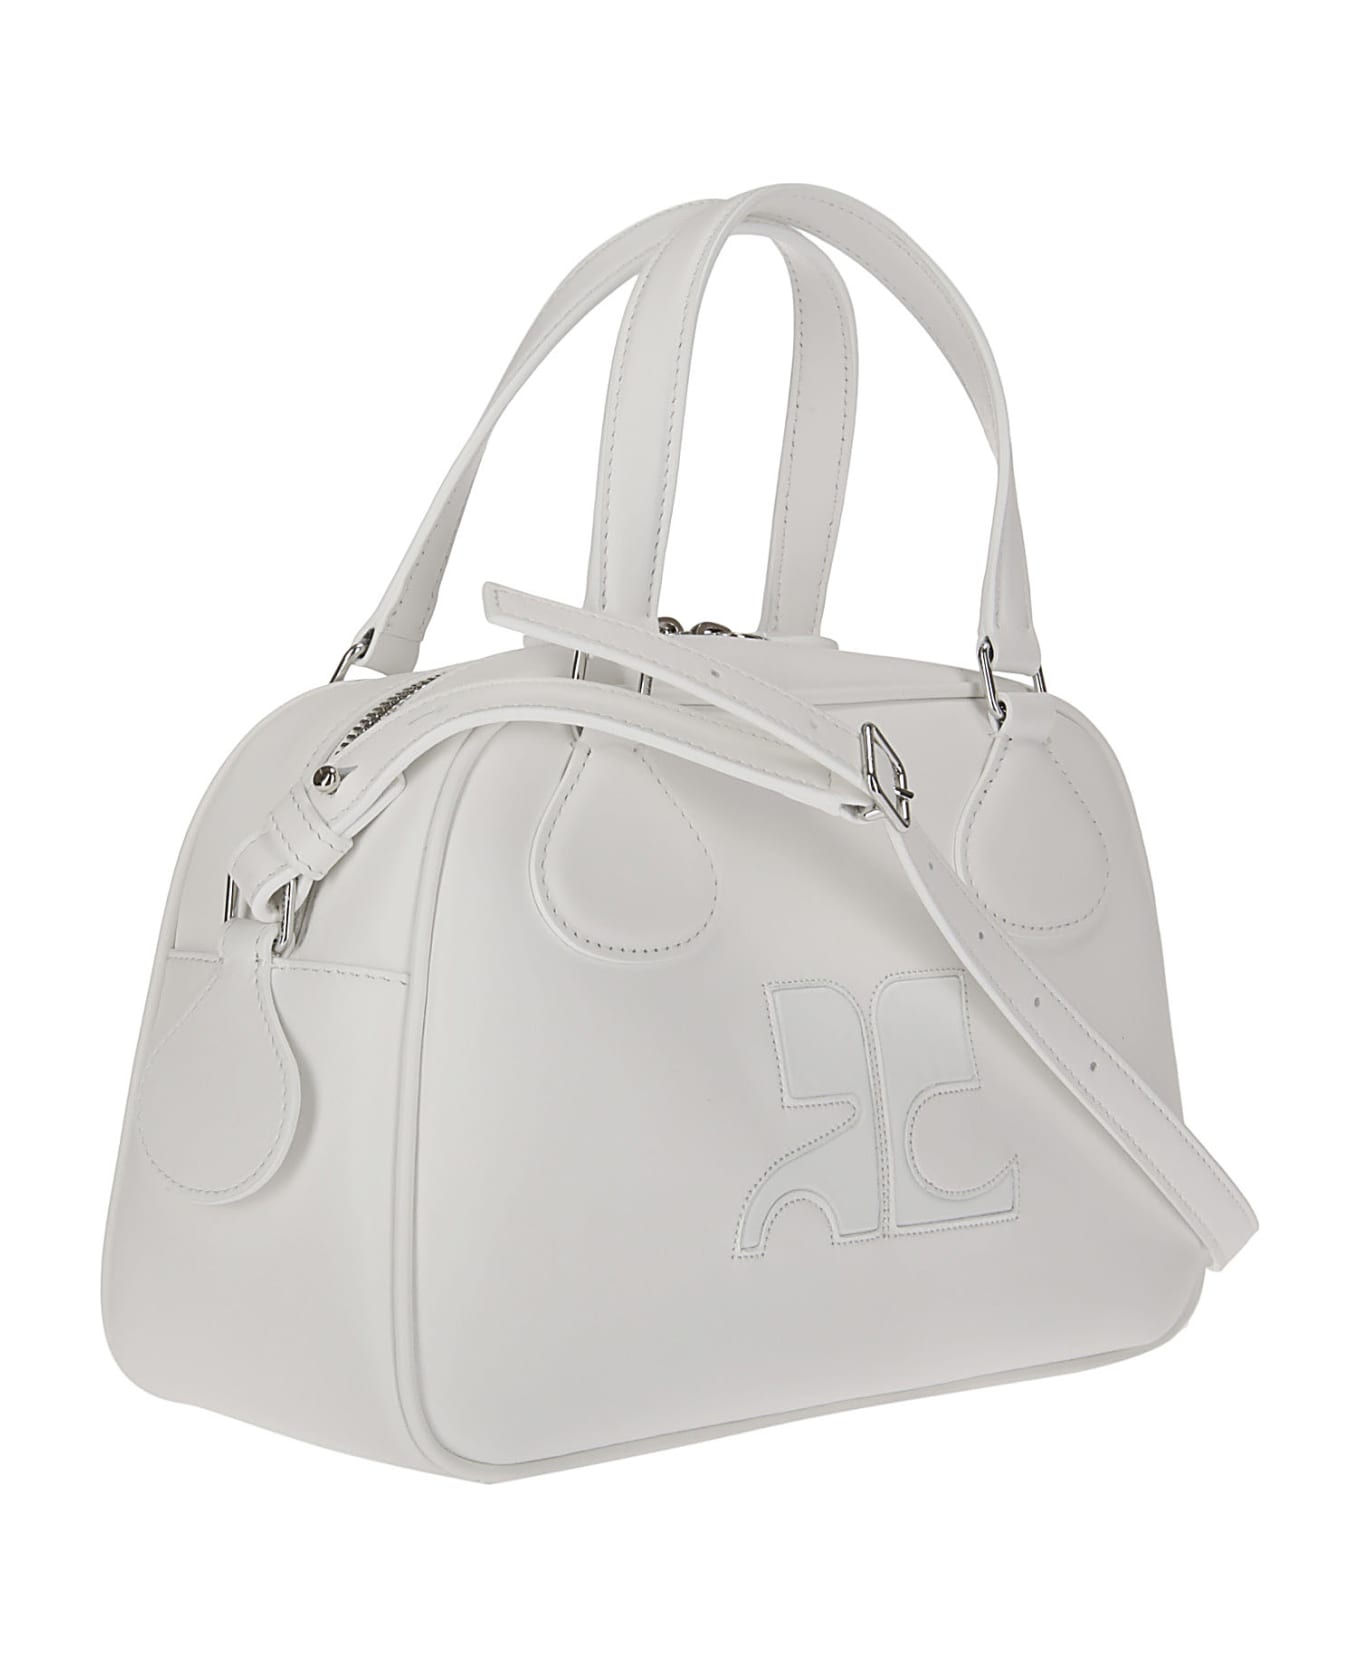 Courrèges Reedition Bowling Bag - HERITAGE WHITE